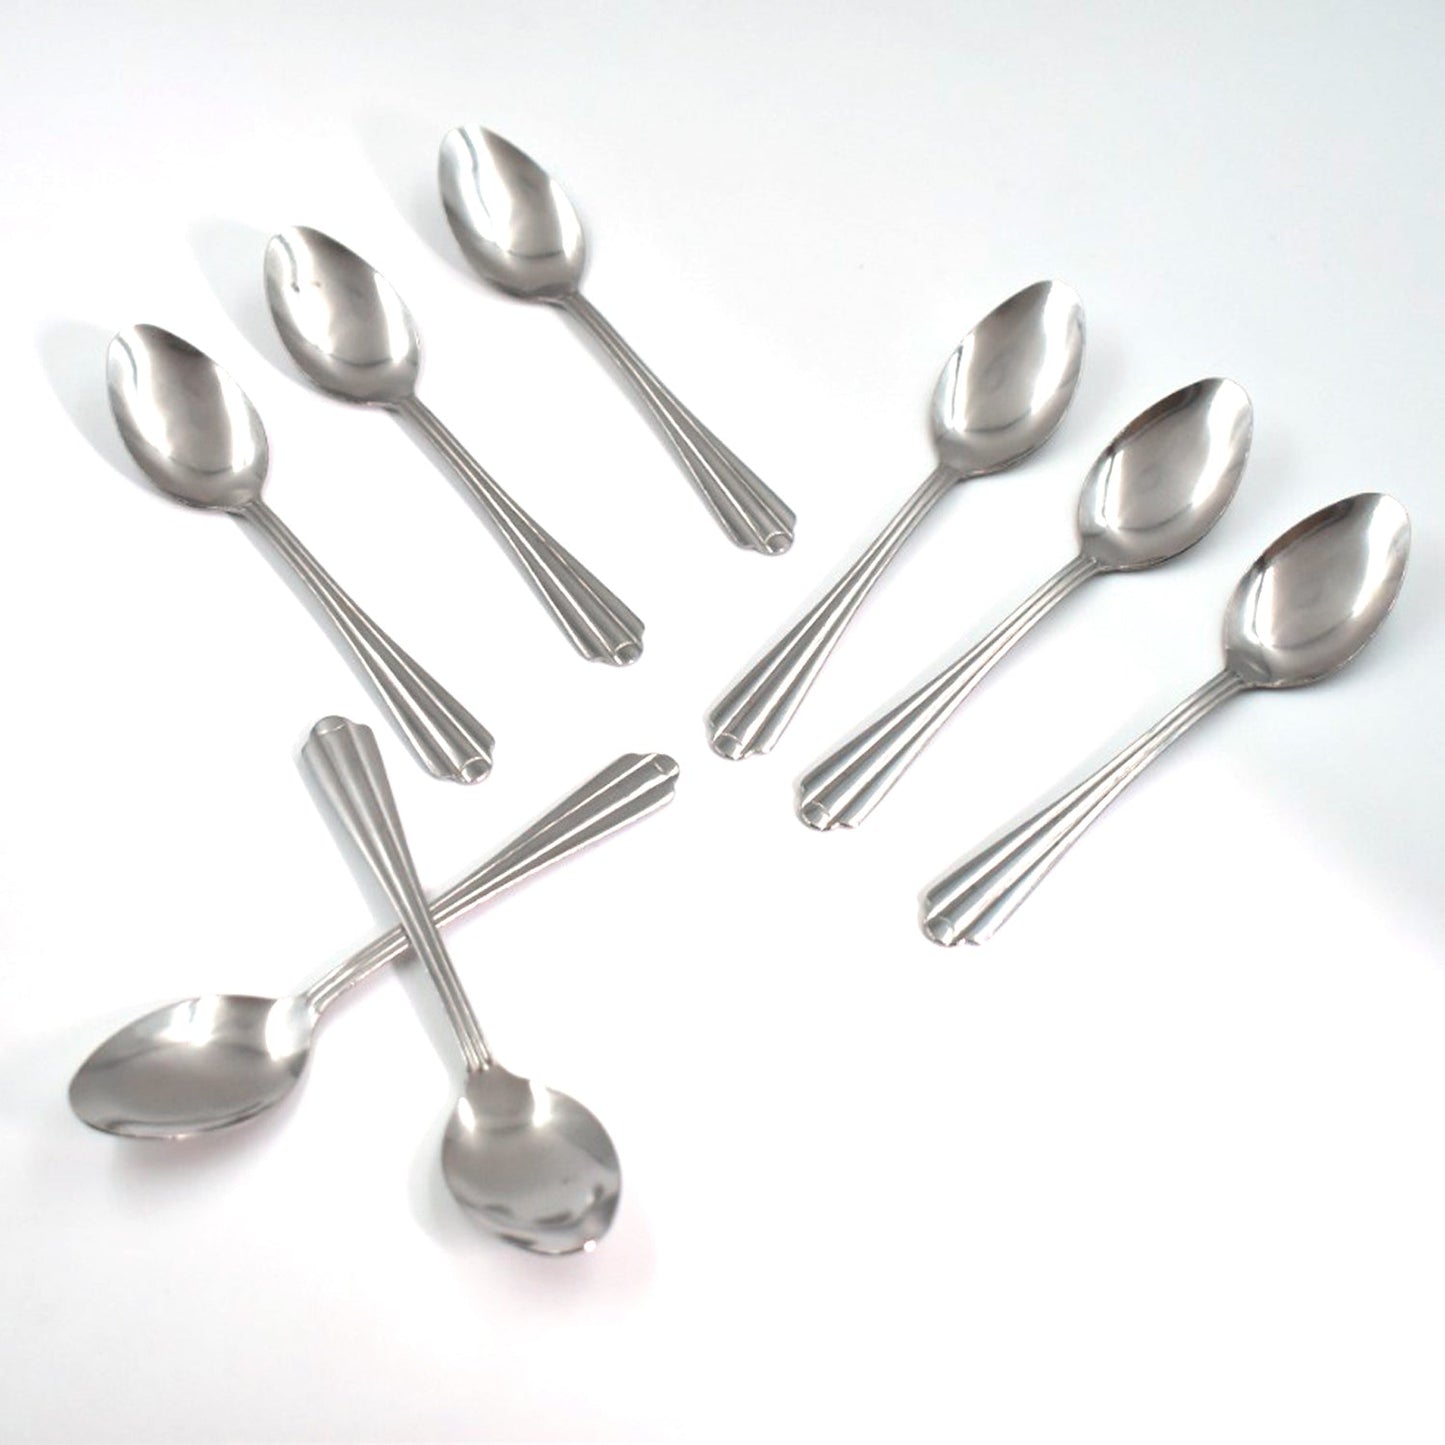 2779 (set of 8pc) small tea spoon Set for Tea, Coffee, Sugar & Spices, Small Spoons Dukandaily